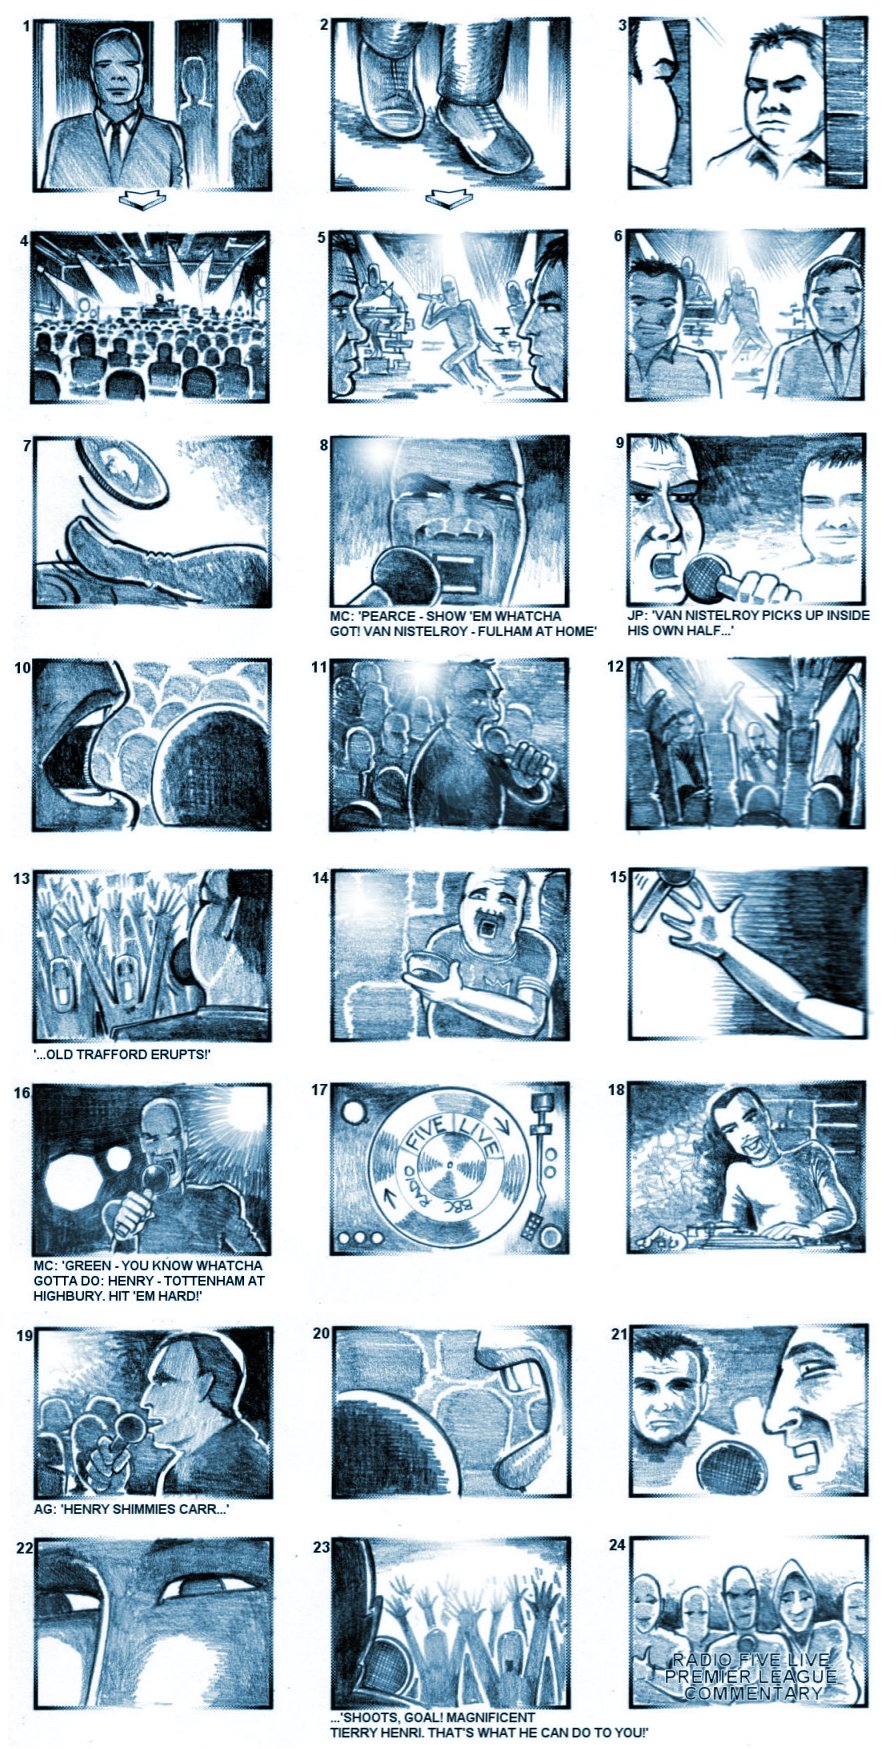 RADIO 5 LIVE COMMENTARY STORYBOARDS BY ANDY SPARROW